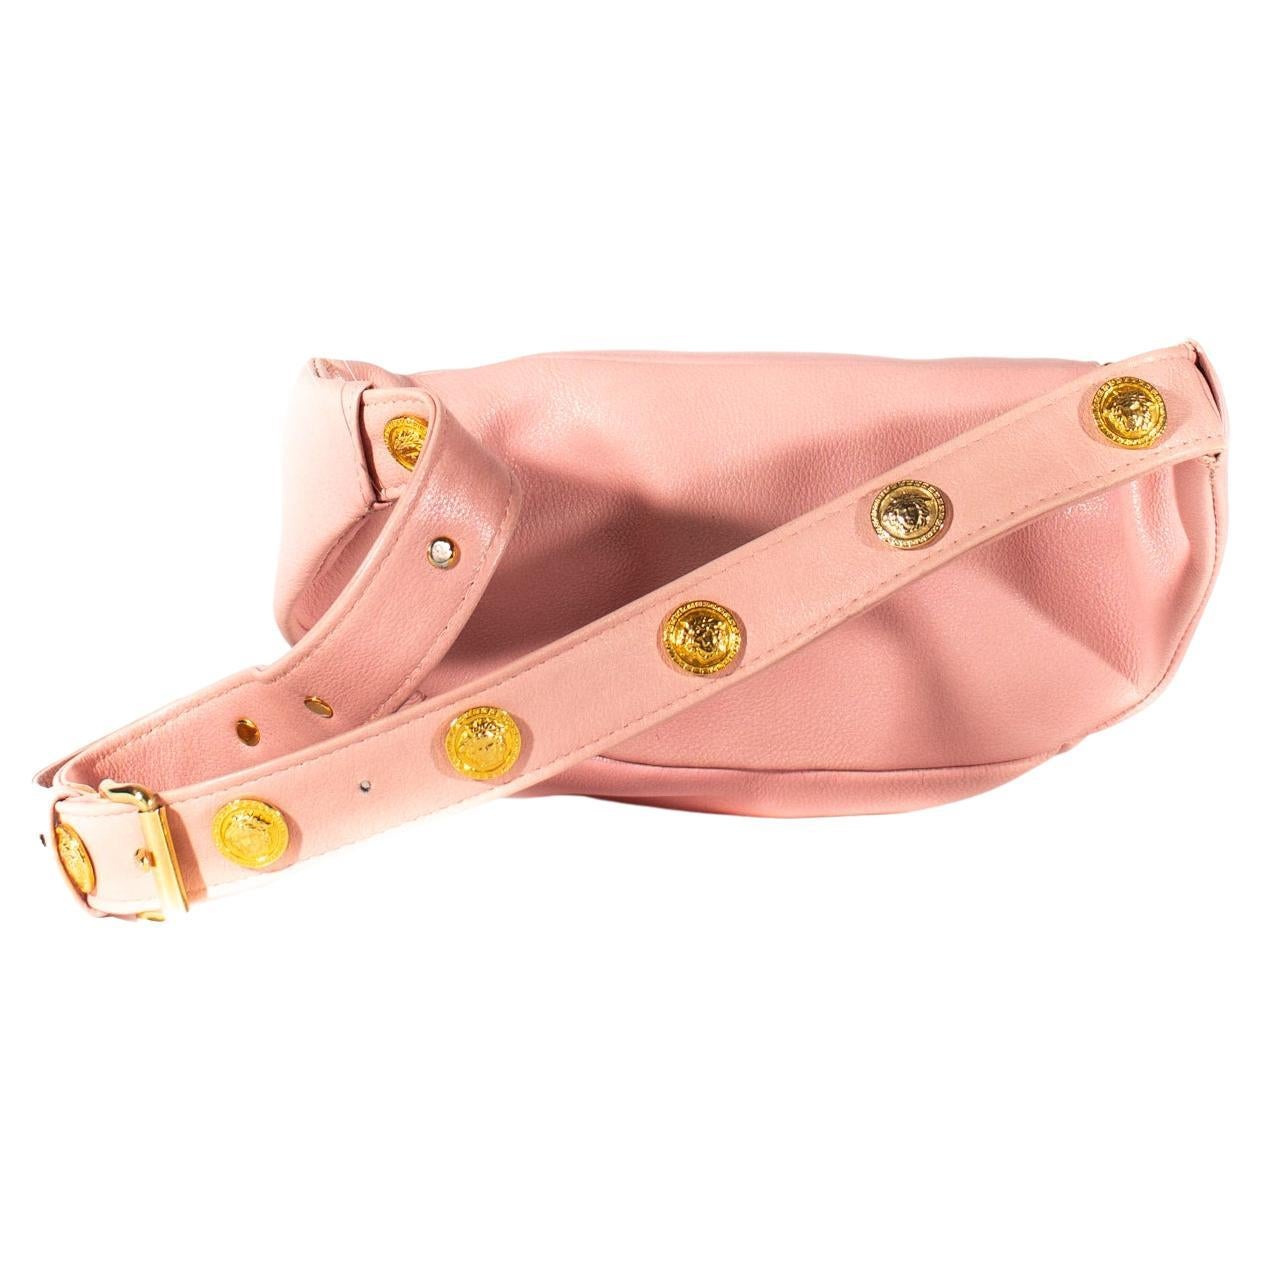 Presenting Constructed with soft light pink leather, this vintage Gianni Versace waist bag screams Versace. Embellished with gold Medusa coins throughout, this bum bag is the perfect touch for elevating any outfit. With an adjustable leather strap,